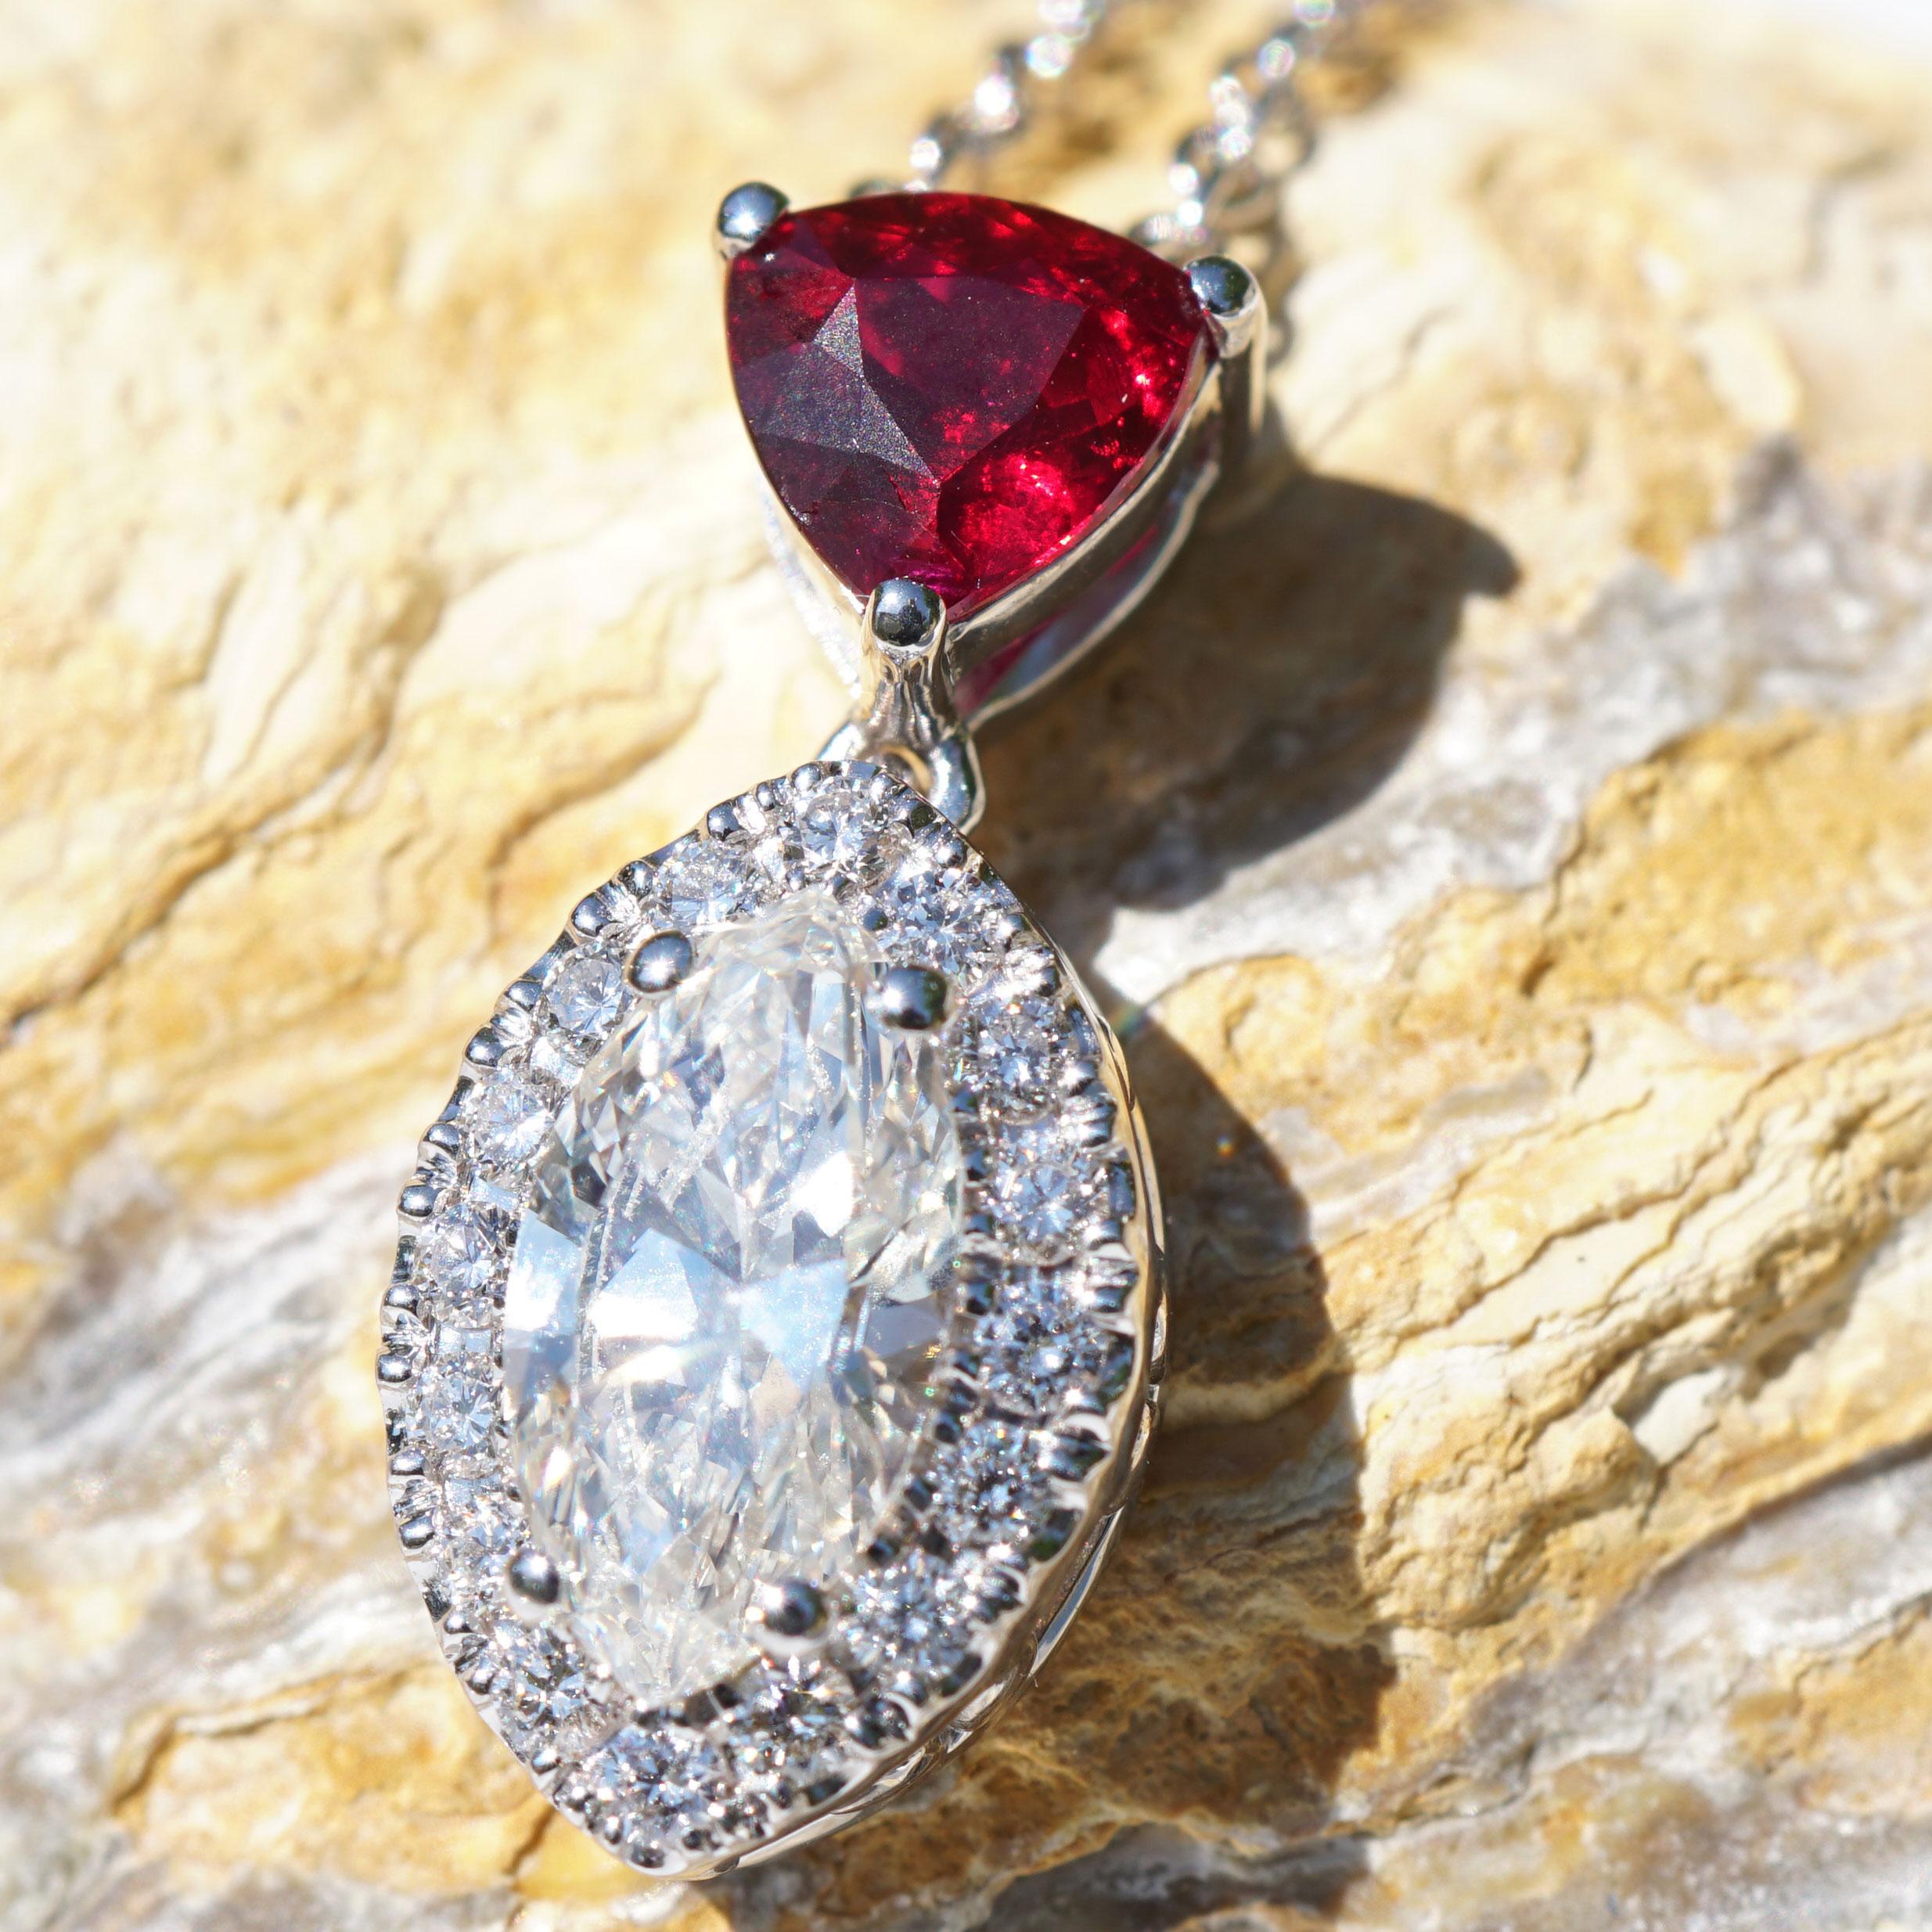 Pigeonblood  Ruby Diamond Pendant with Chain Red Rare from Mosambique 0.64 Ct  For Sale 3